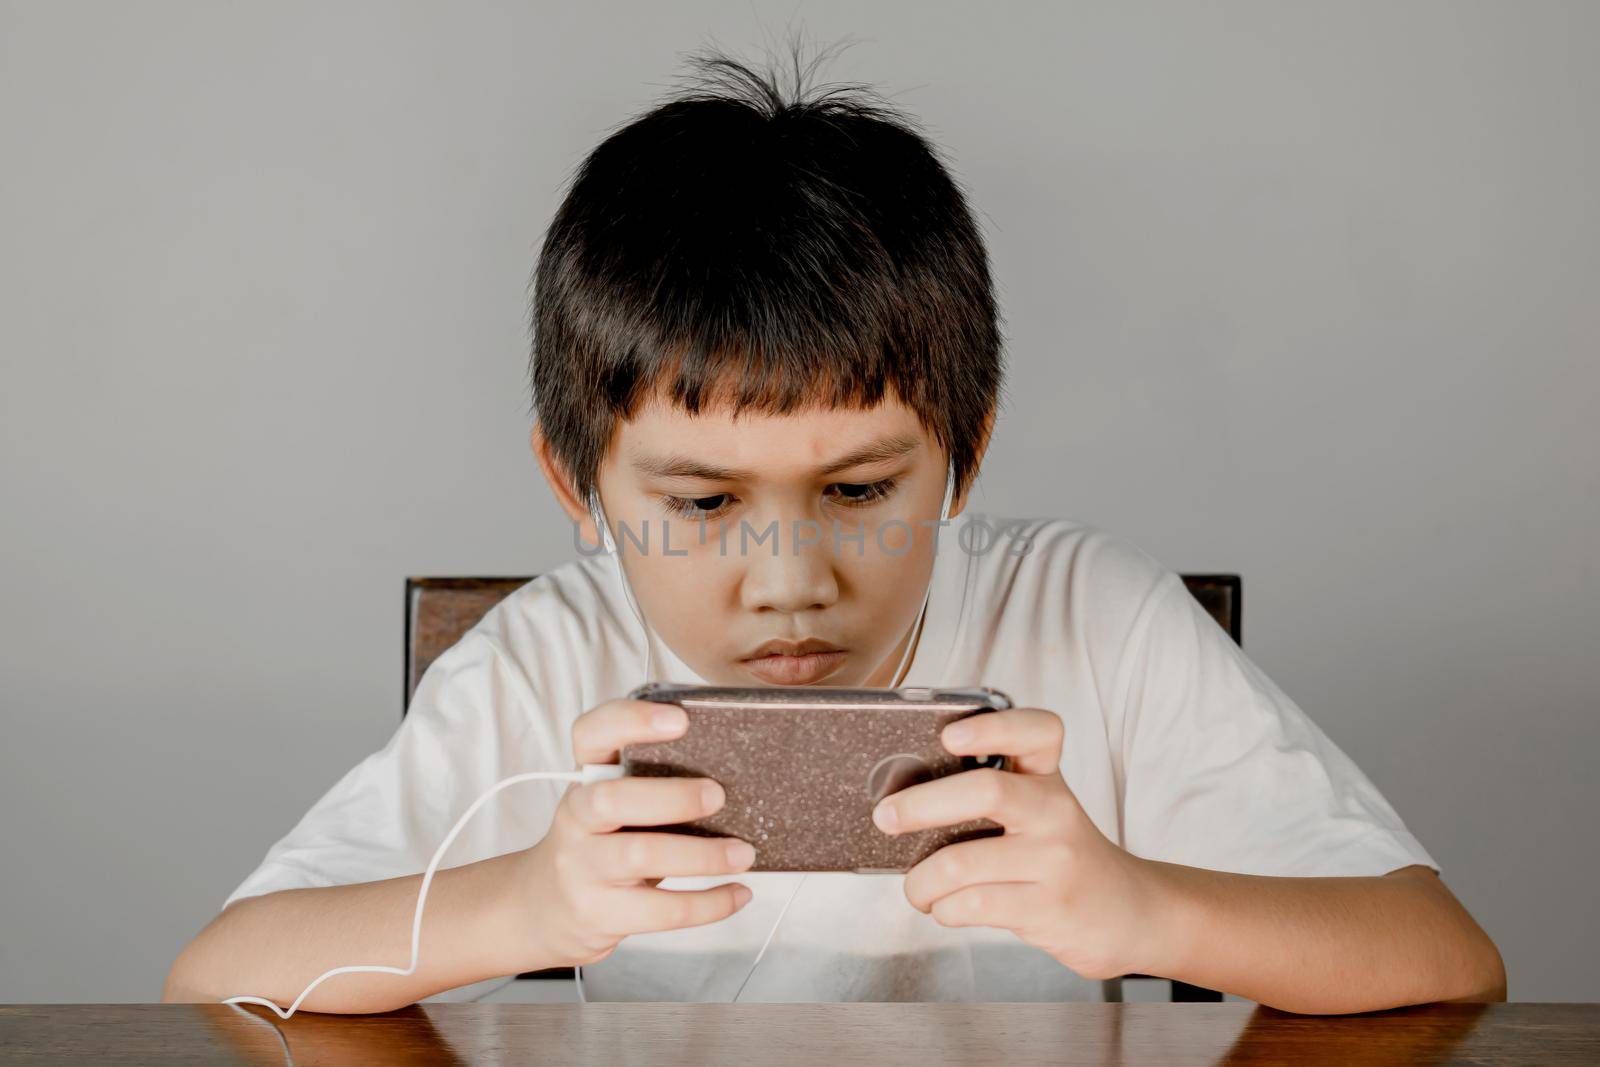 Closeup of a boy's face wearing headphones and intending to play games on his smartphone. by wattanaphob